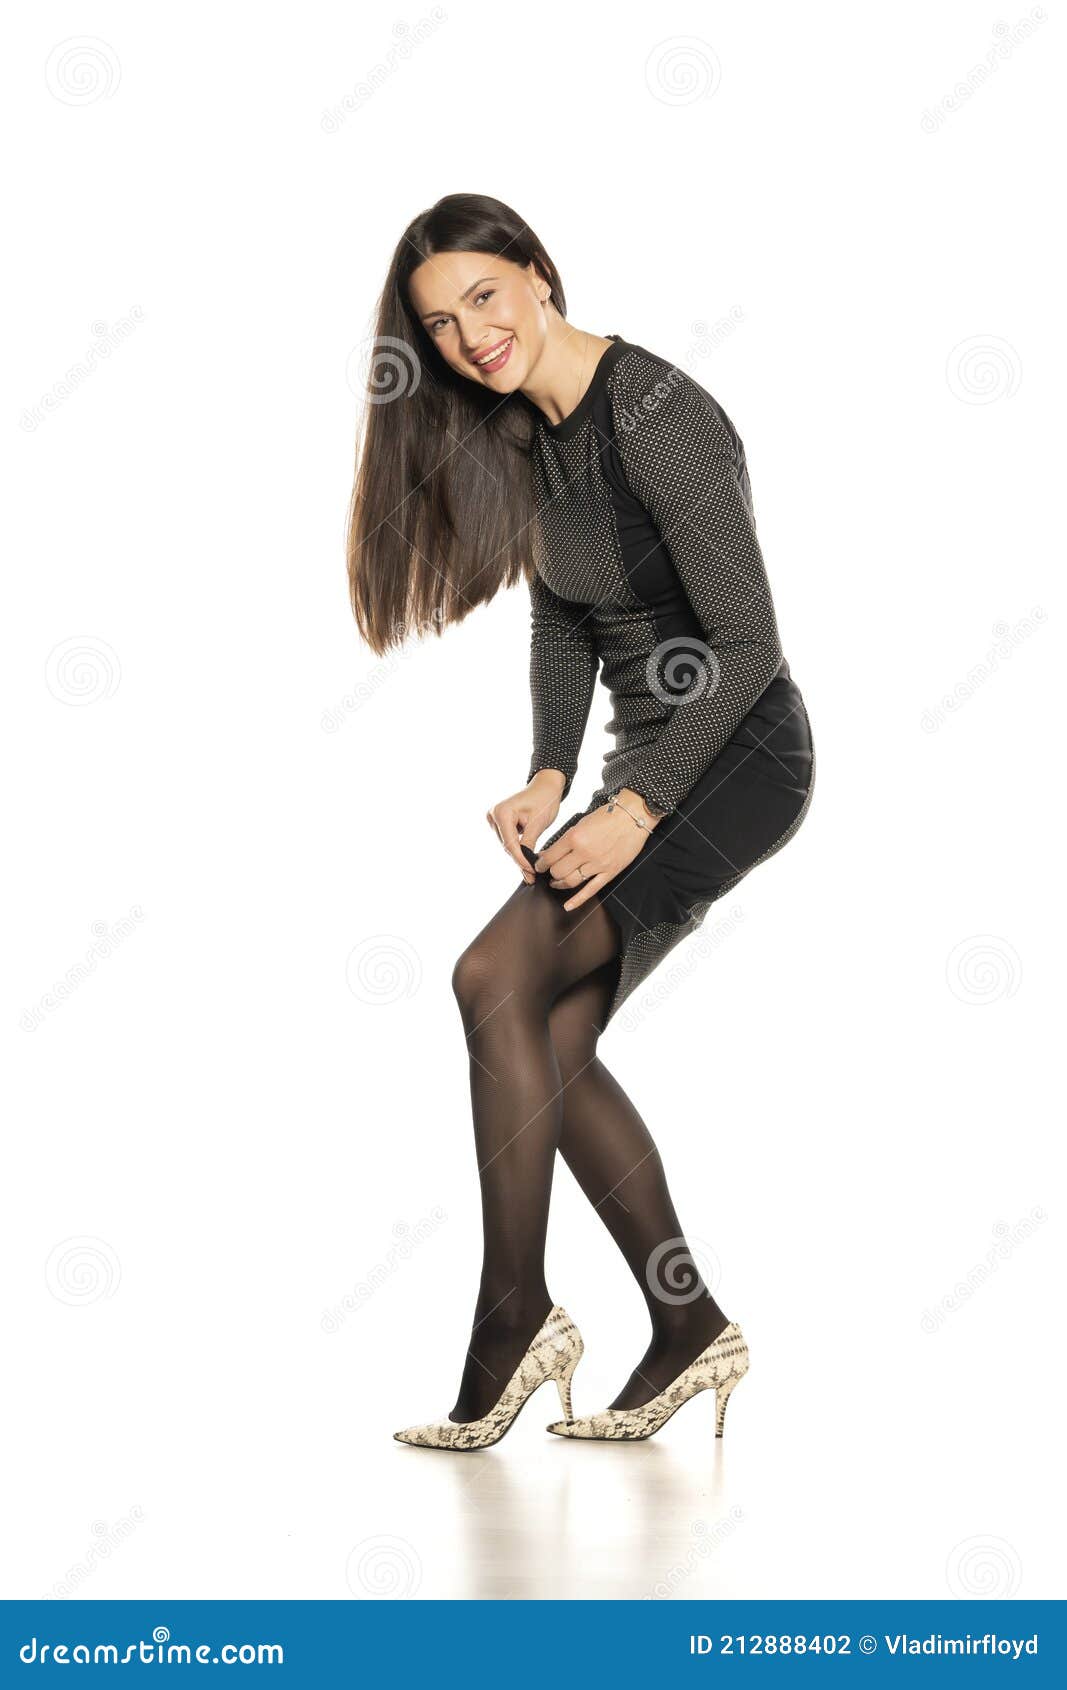 Young Smiling Woman in a Short Tight Dress Adjusting Her Leggings